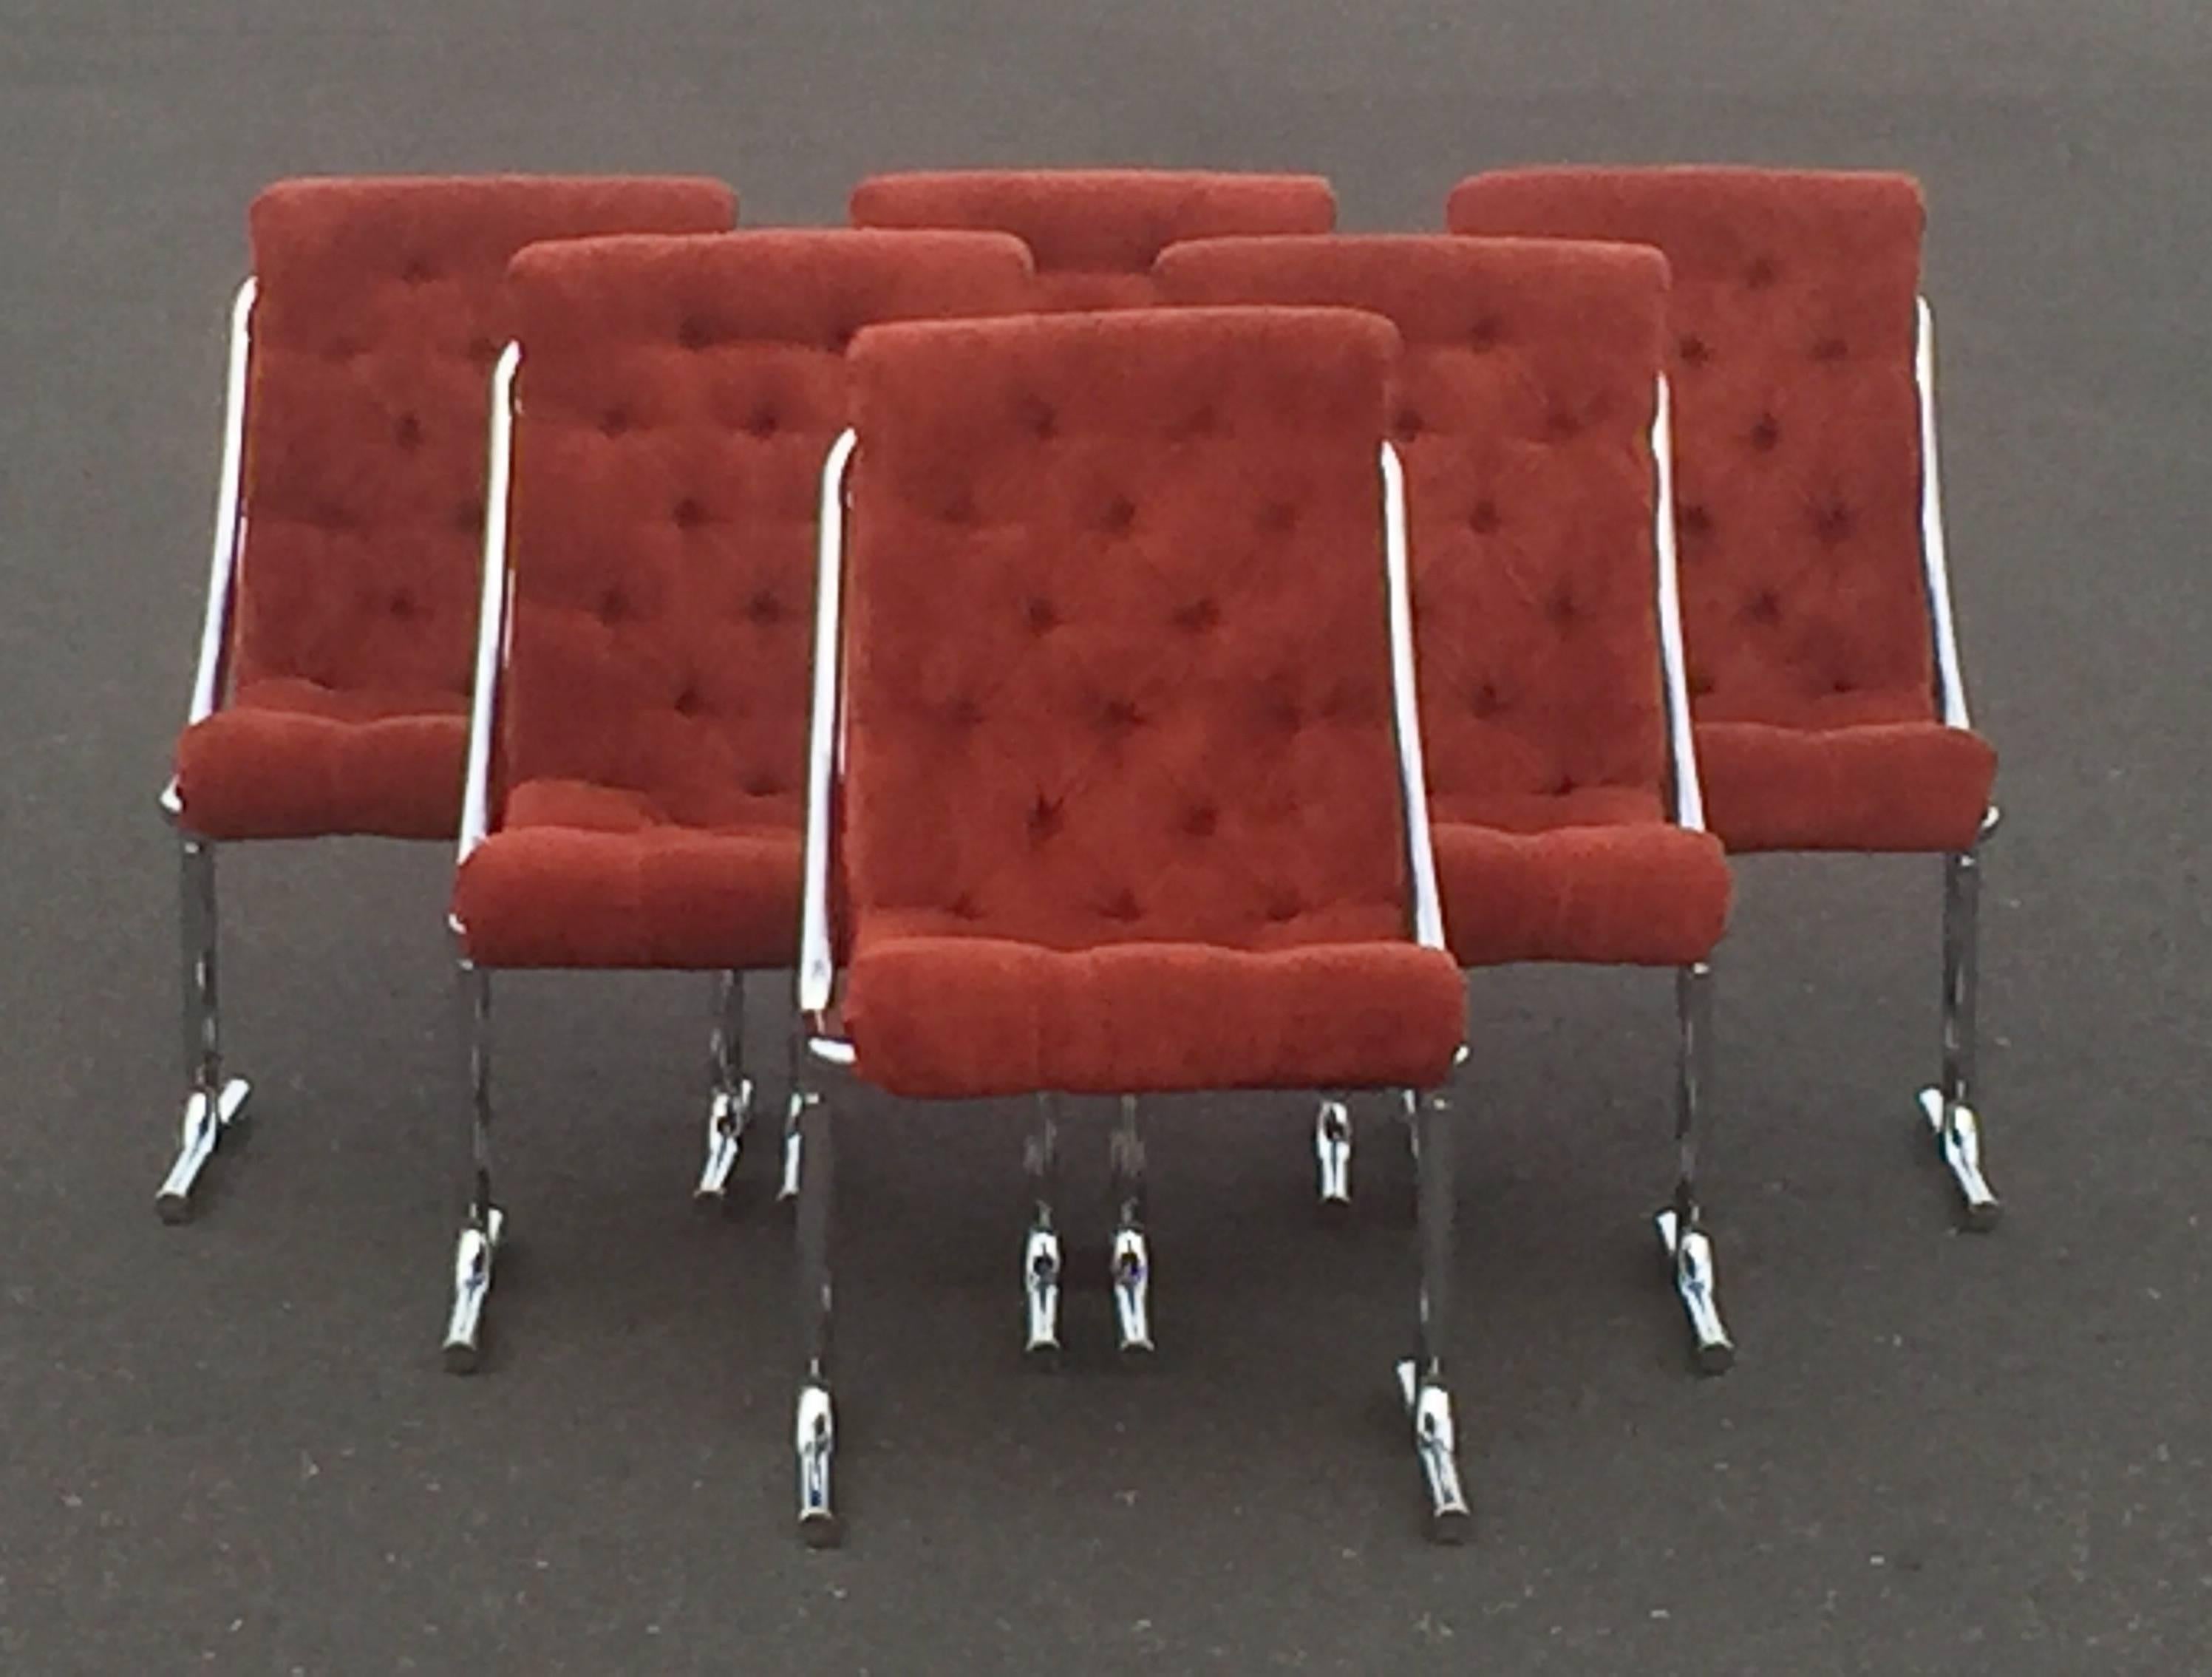 daystrom chrome chairs